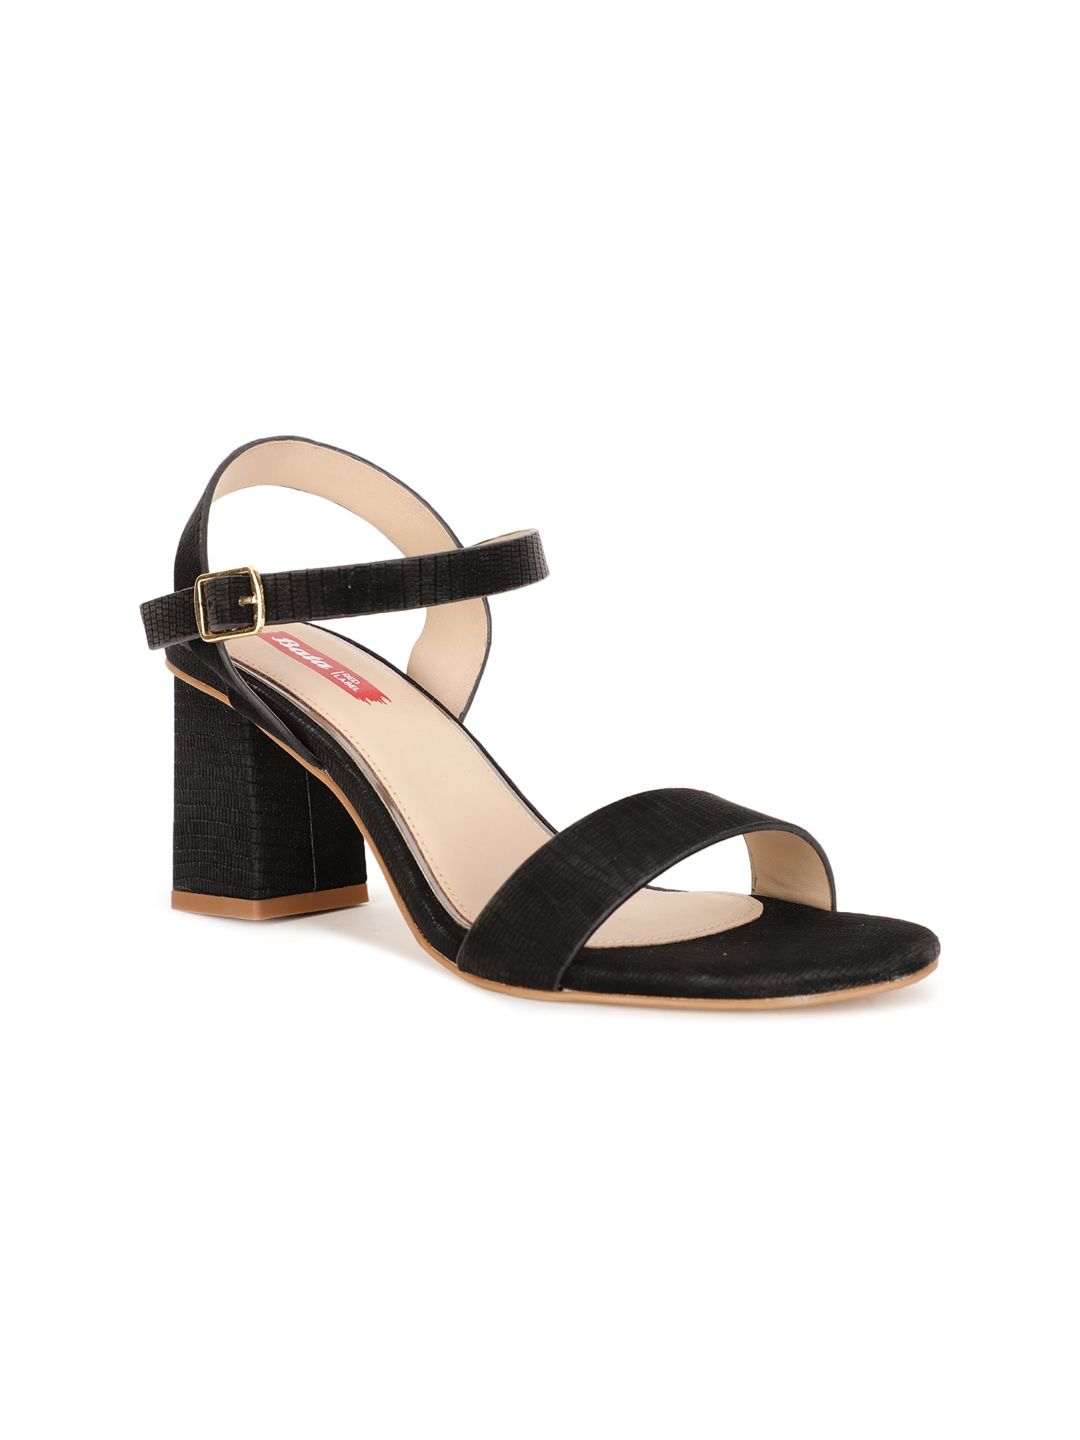 Bata Black Striped Block Sandals with Buckles Price in India